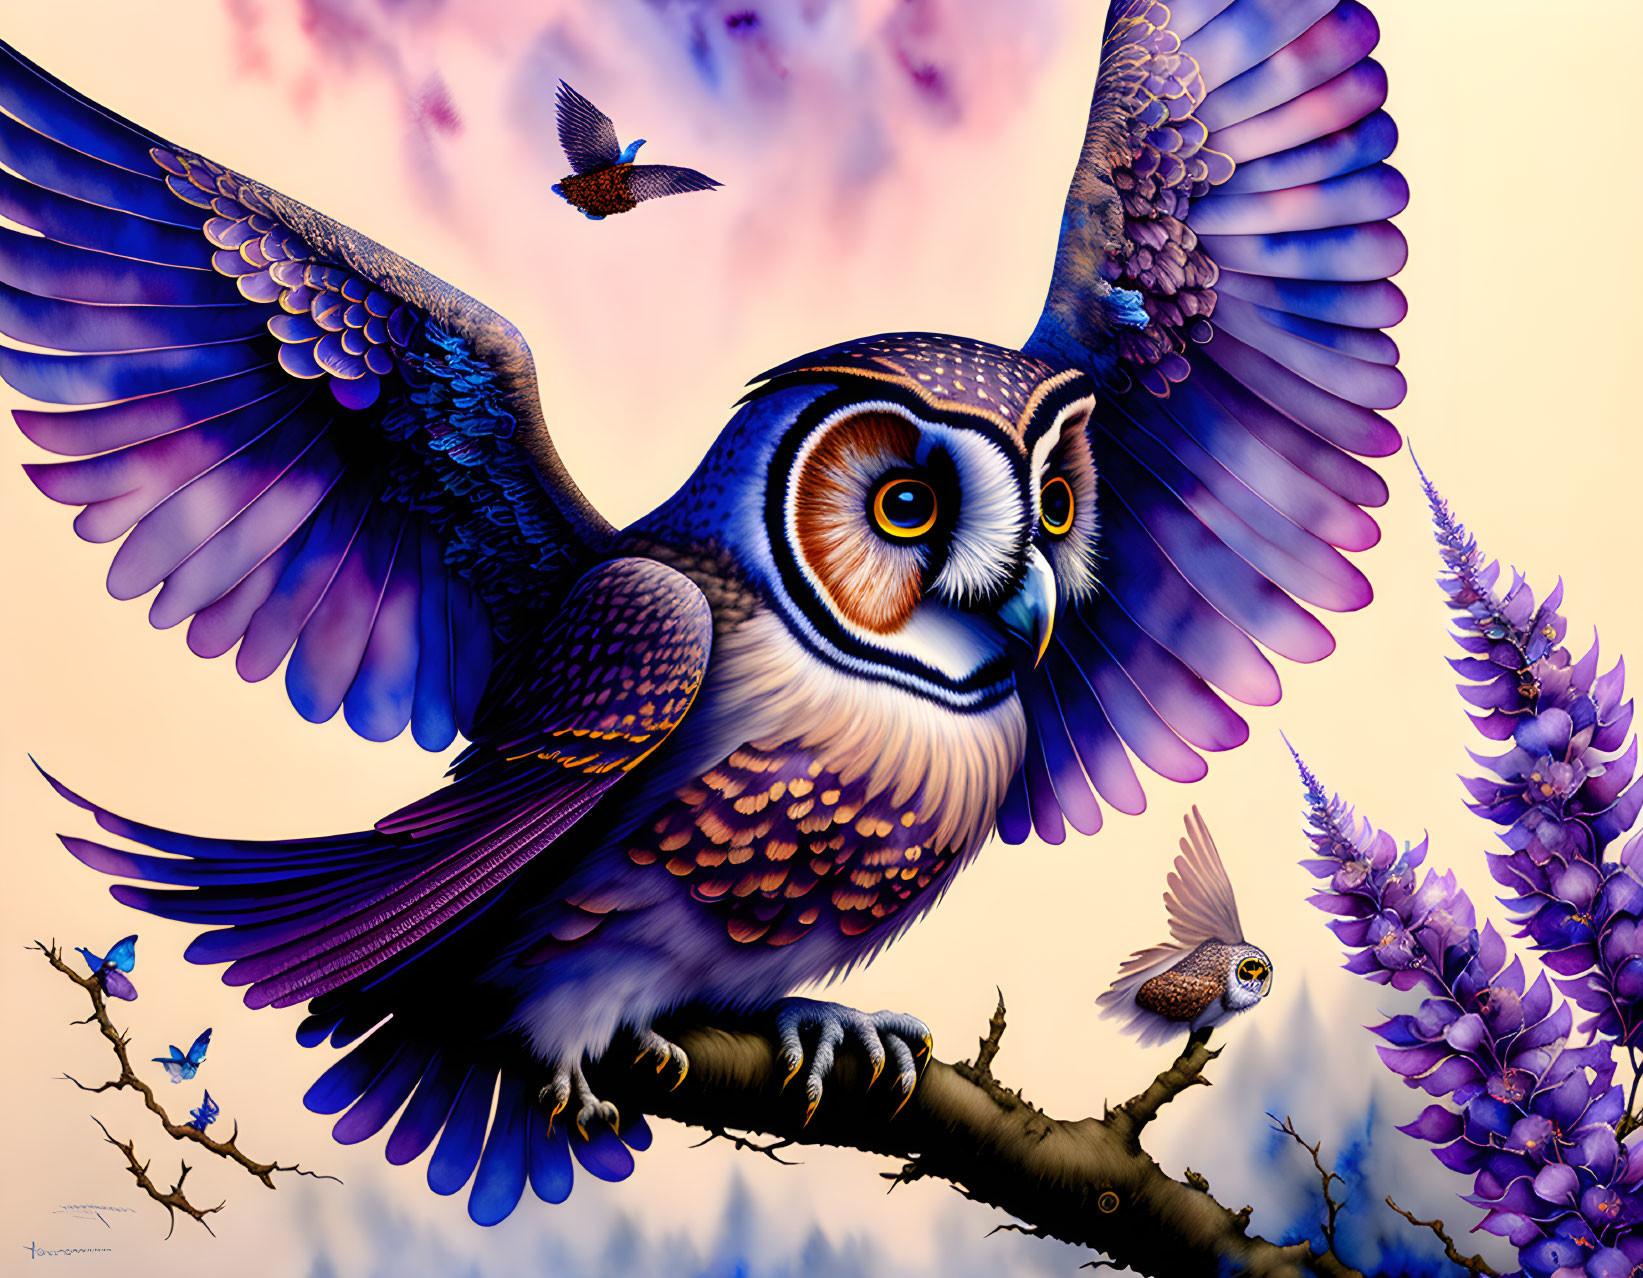 Colorful Owl Illustration Flying with Spread Wings Among Birds in Pastel Sky